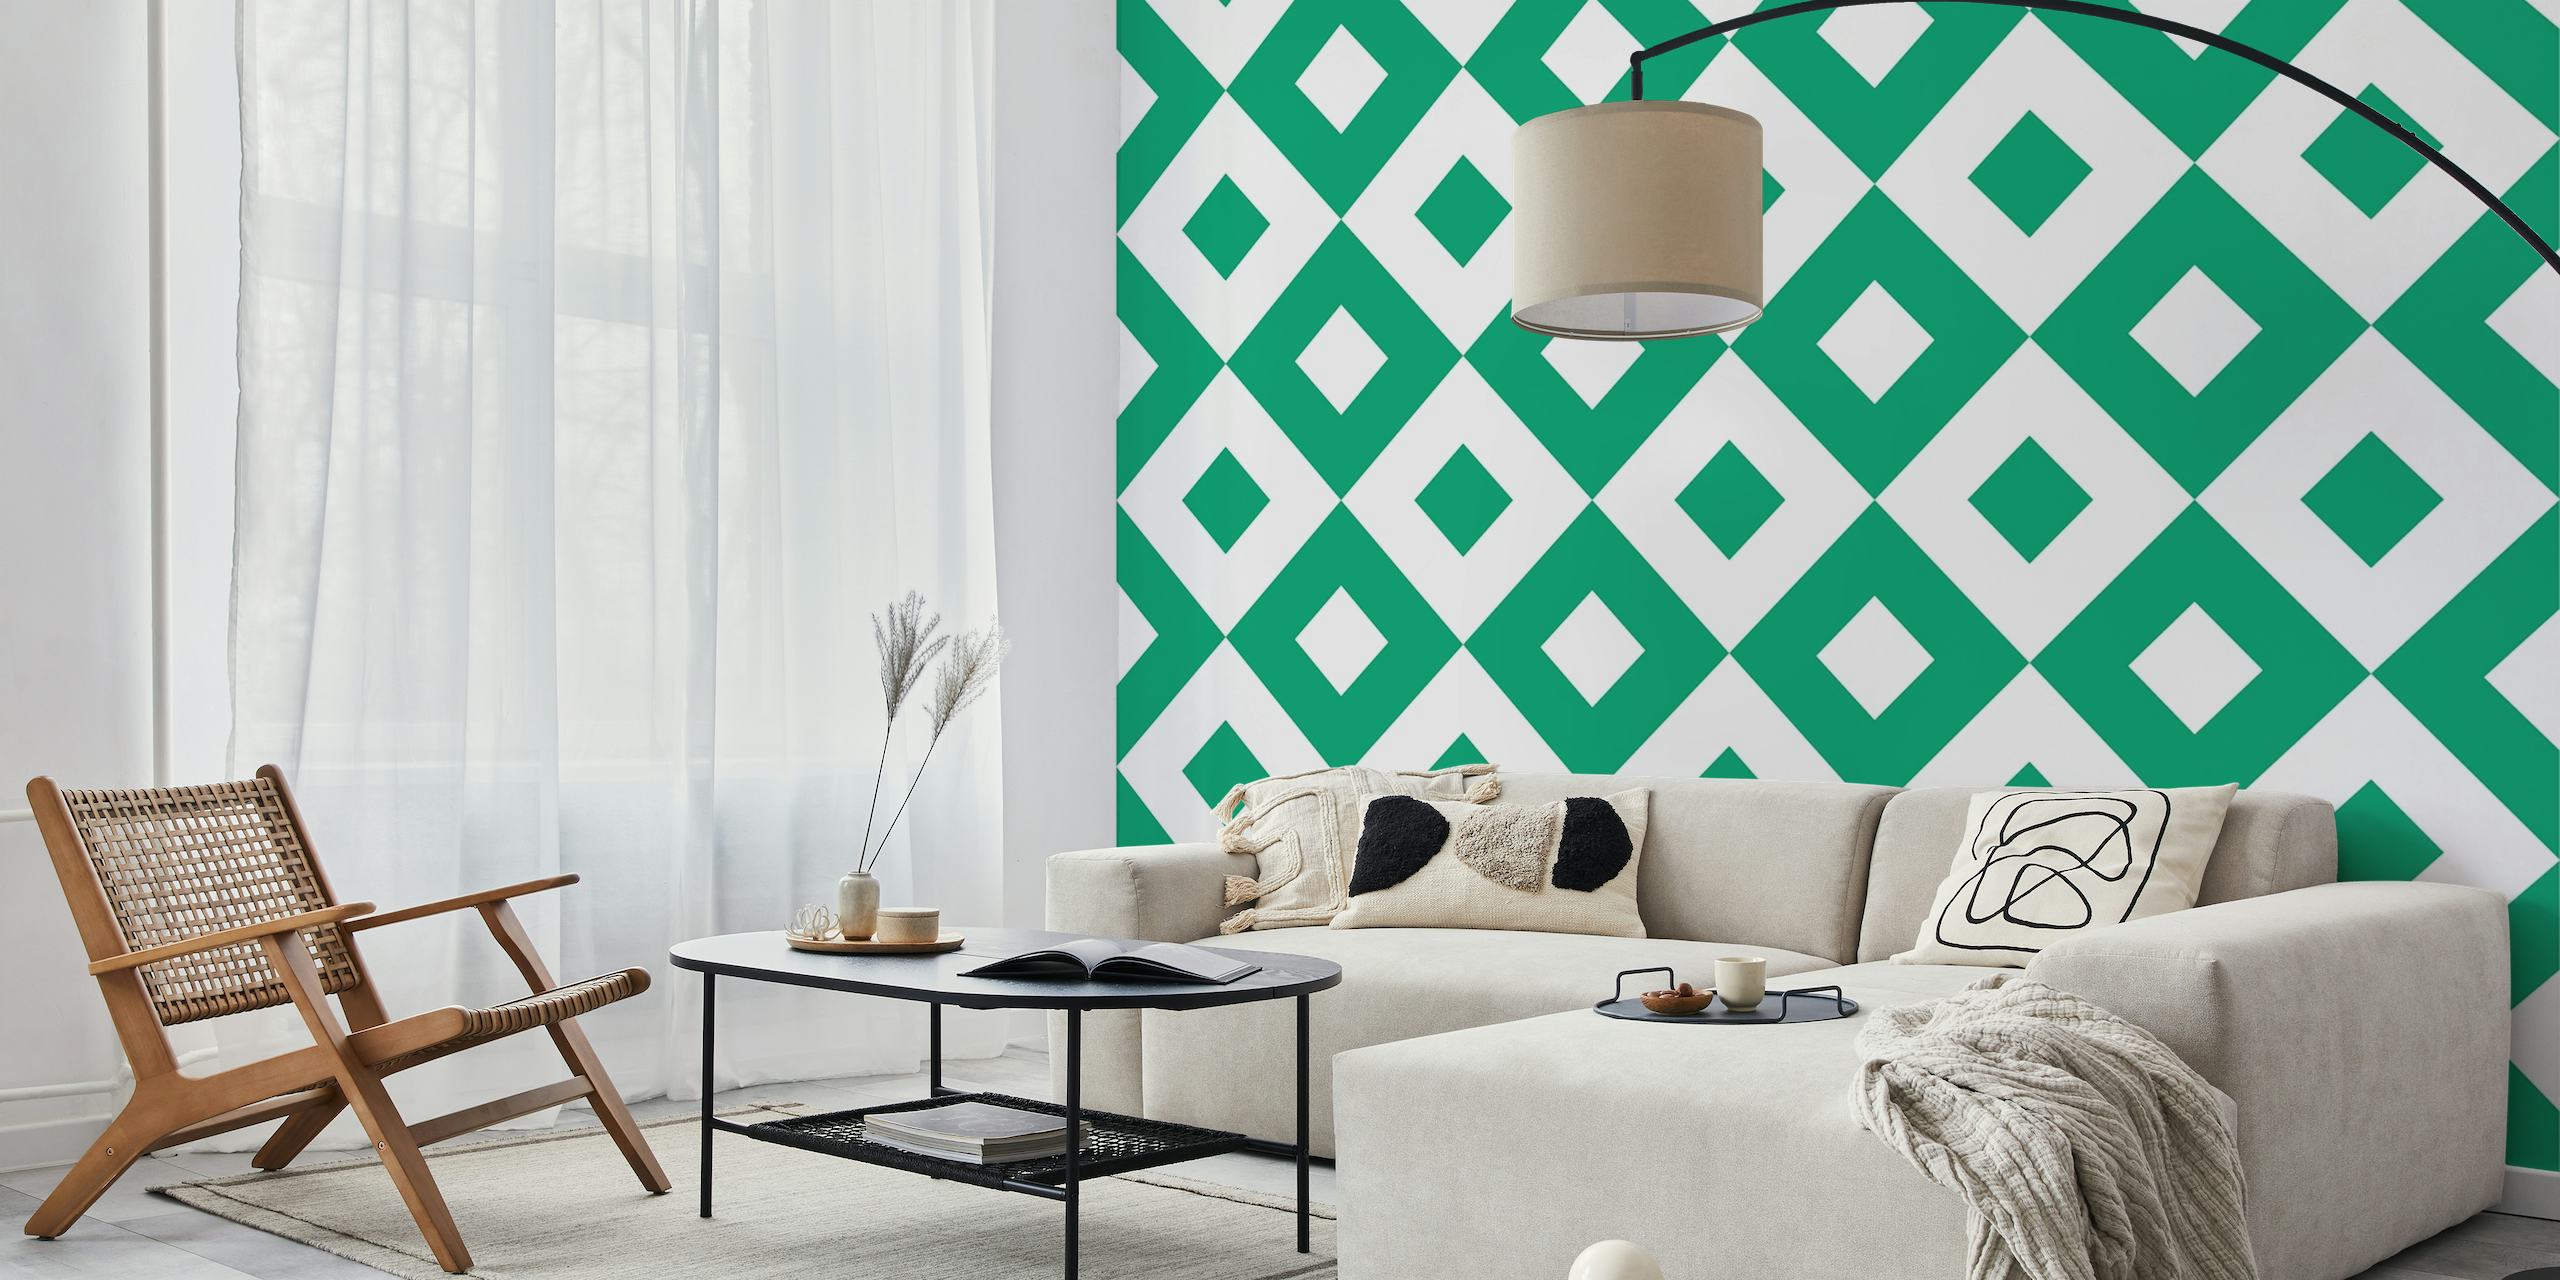 Diamonds pattern design in green and white behang